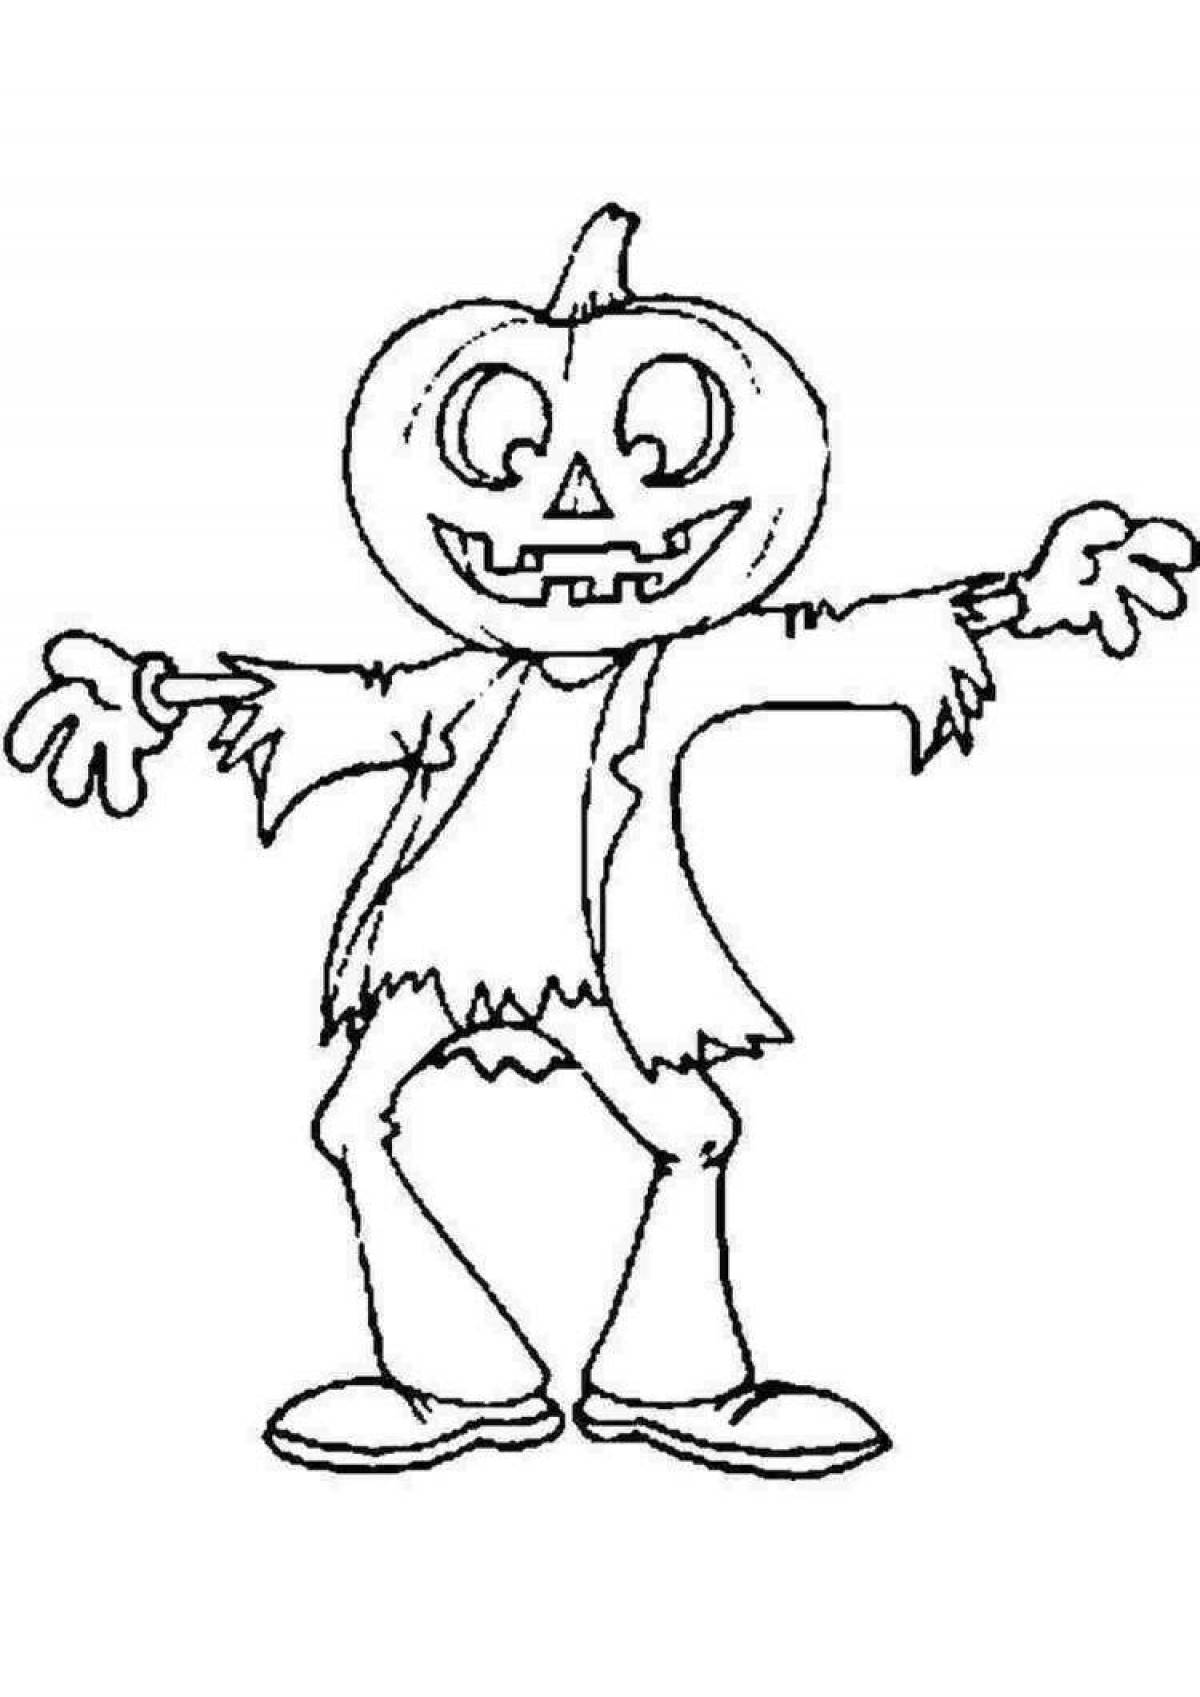 Grim scary baby coloring page